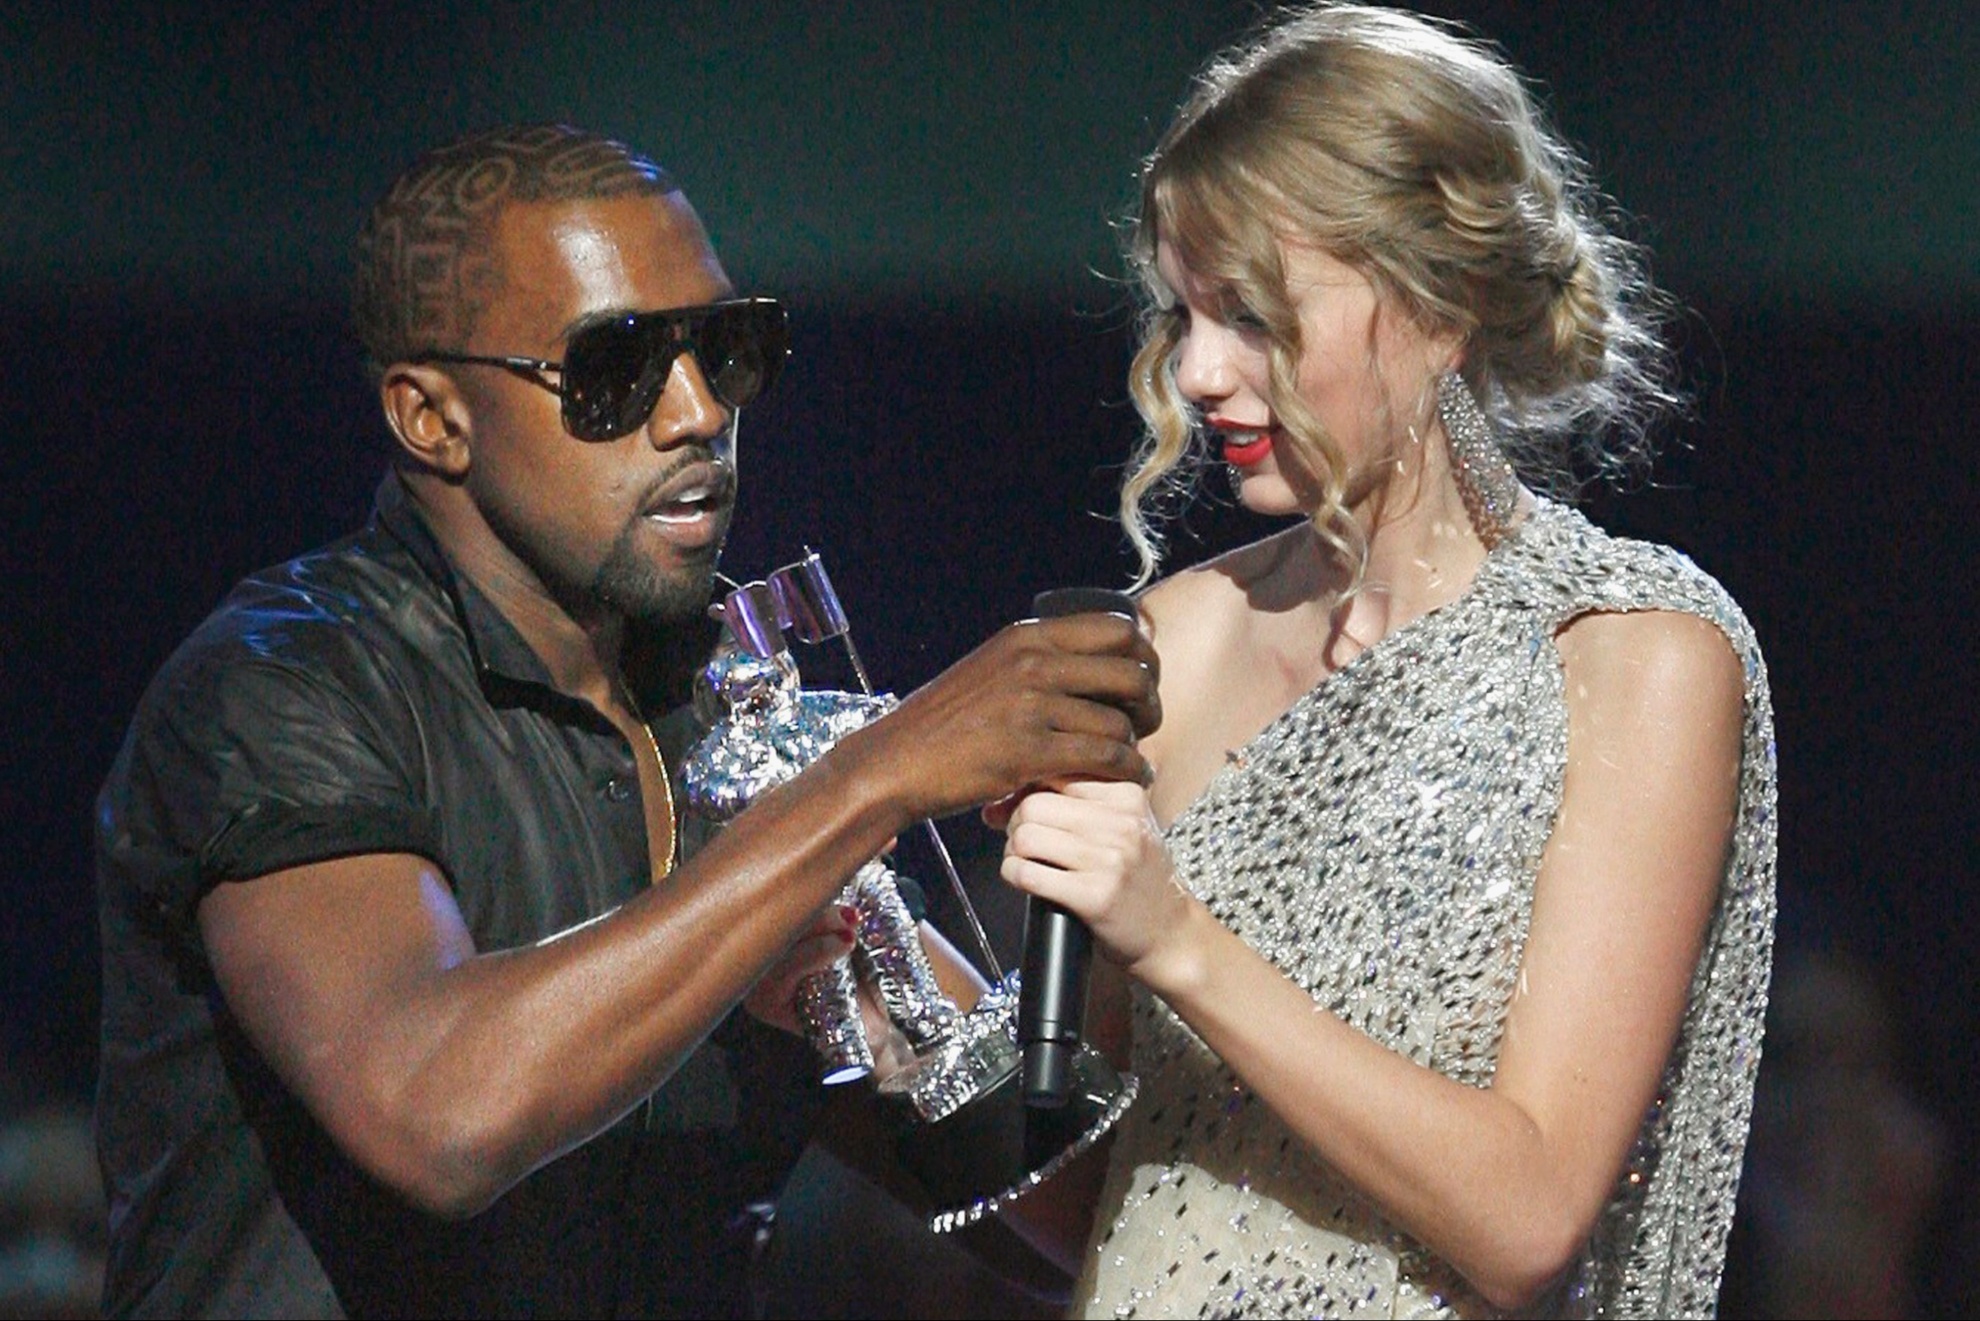 The moment Kanye West takes the microphone from Taylor Swift at the MTV VMAs in 2009.